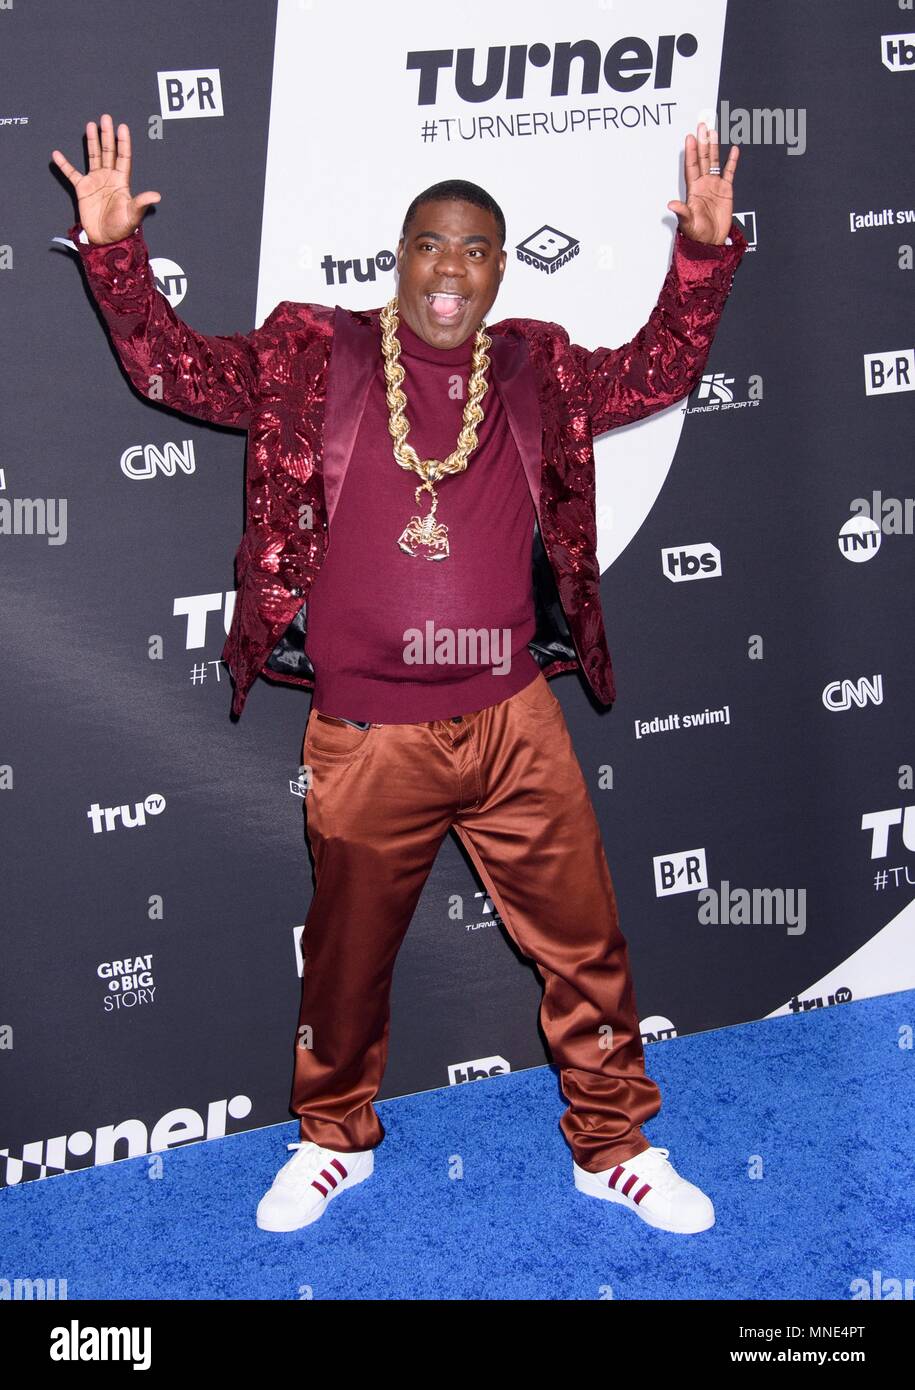 New York, NY, USA. 16th May, 2018. Tracy Morgan at arrivals for 2018 Turner Upfront Presentation, Madison Square Garden, New York, NY May 16, 2018. Credit: RCF/Everett Collection/Alamy Live News Stock Photo